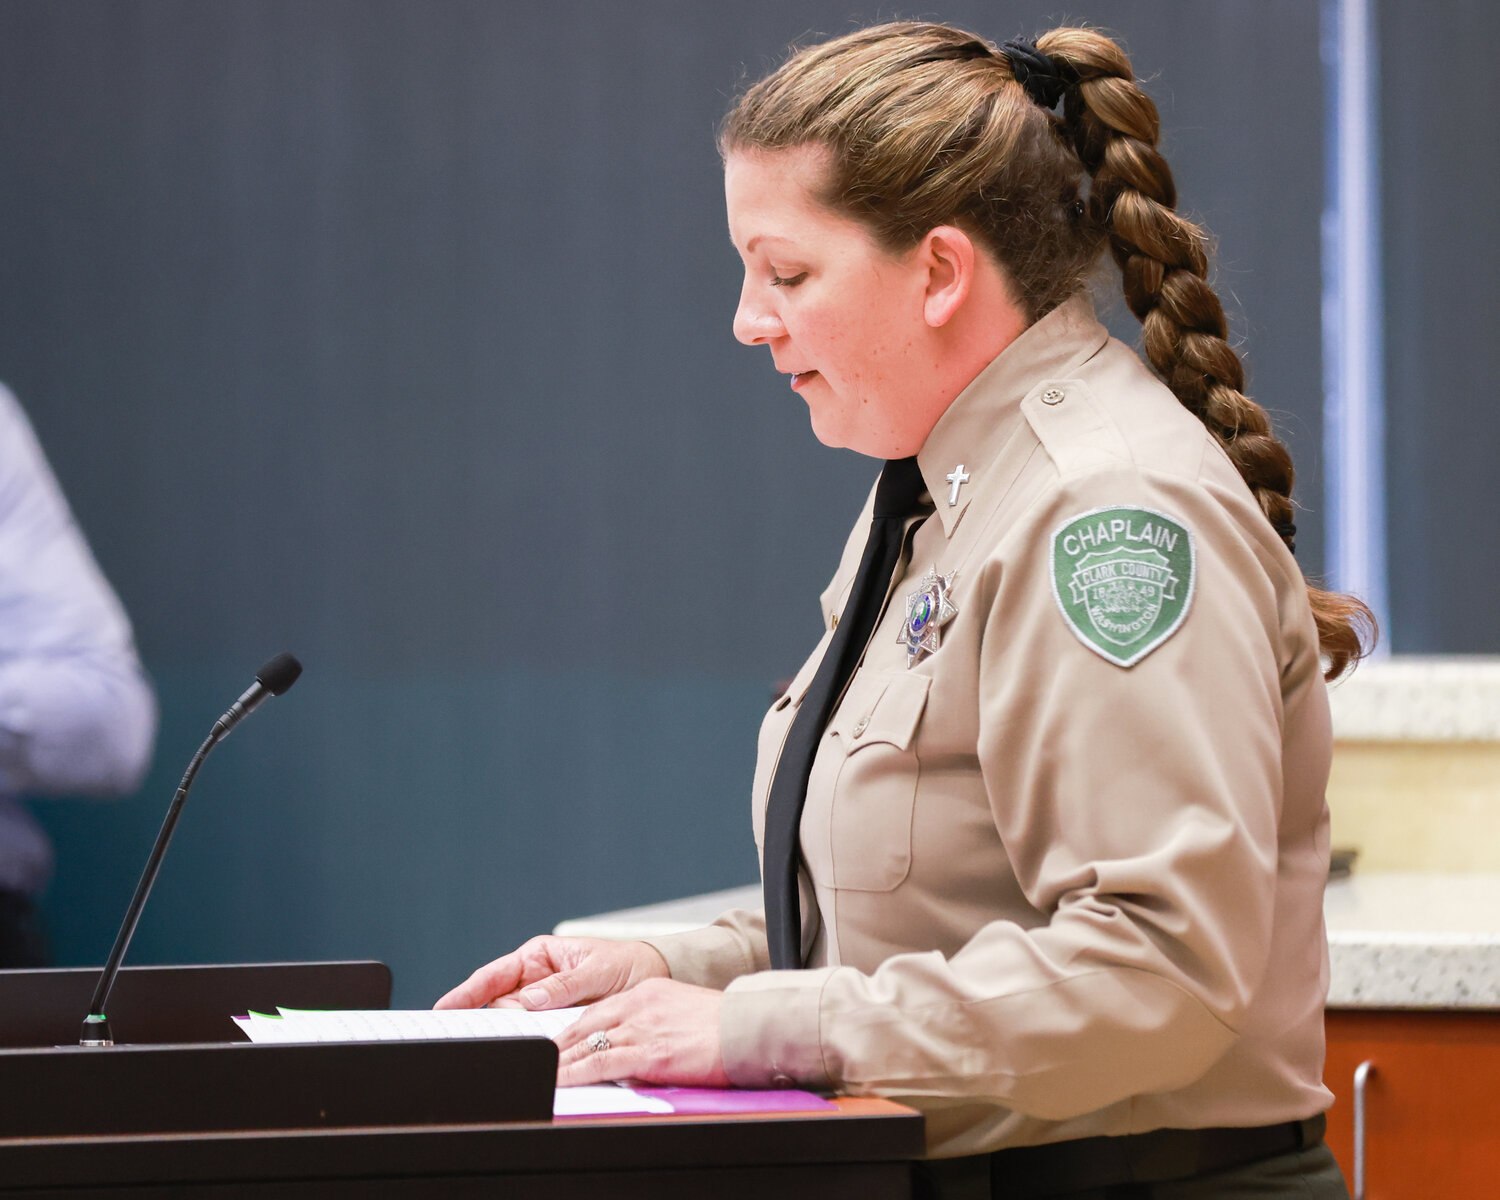 Chaplain Cari Arnsparger, with the Clark County Sheriff's Office, speaks before she gives a prayer for the invocation of the Clark County Law Enforcement Memorial Ceremony on Thursday, May 18.